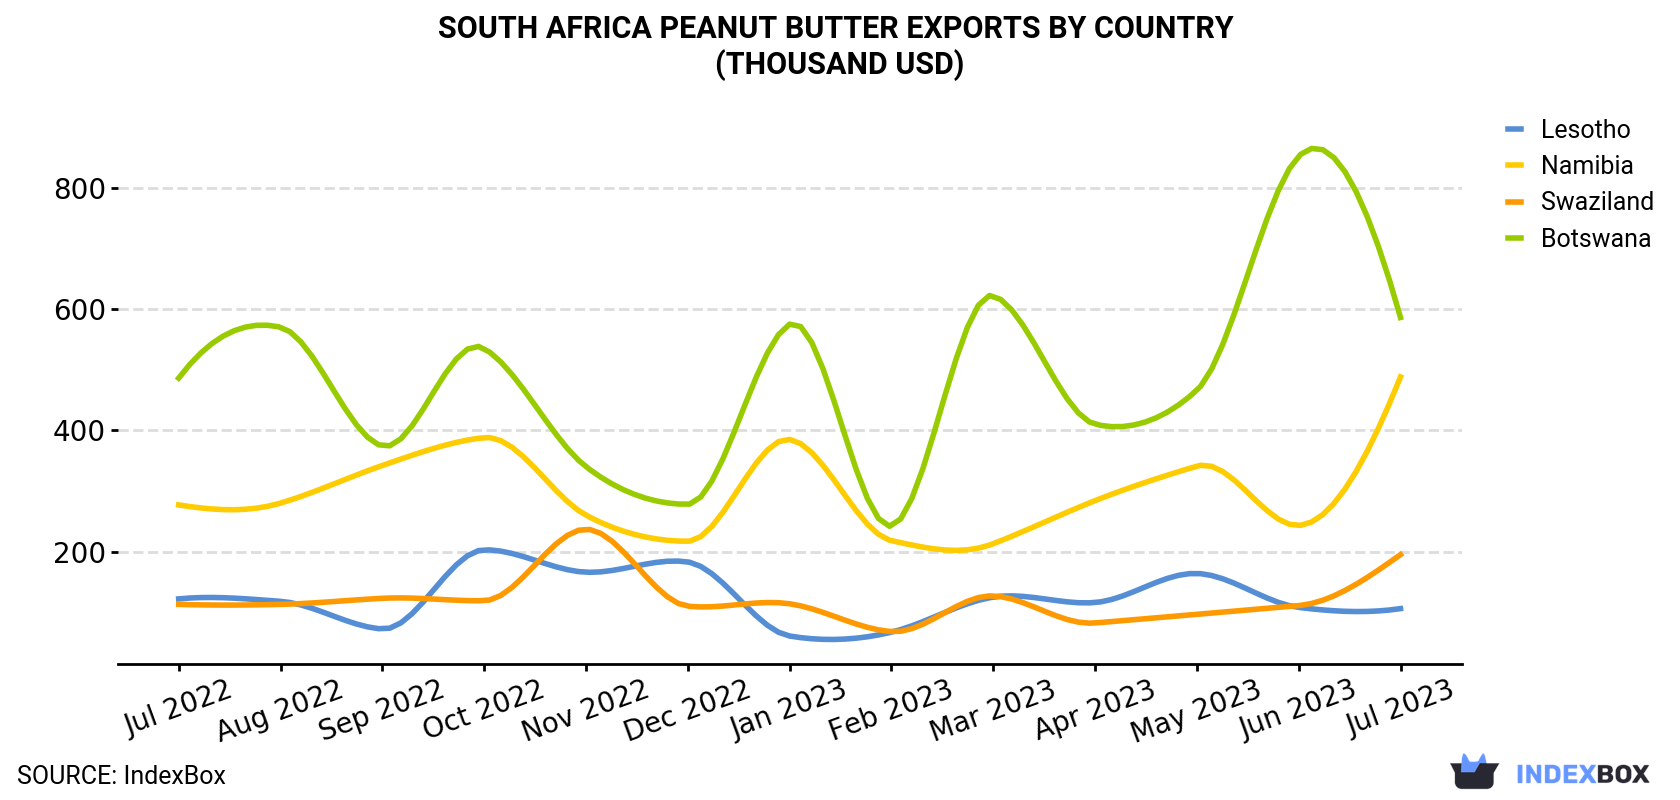 South Africa Peanut Butter Exports By Country (Thousand USD)